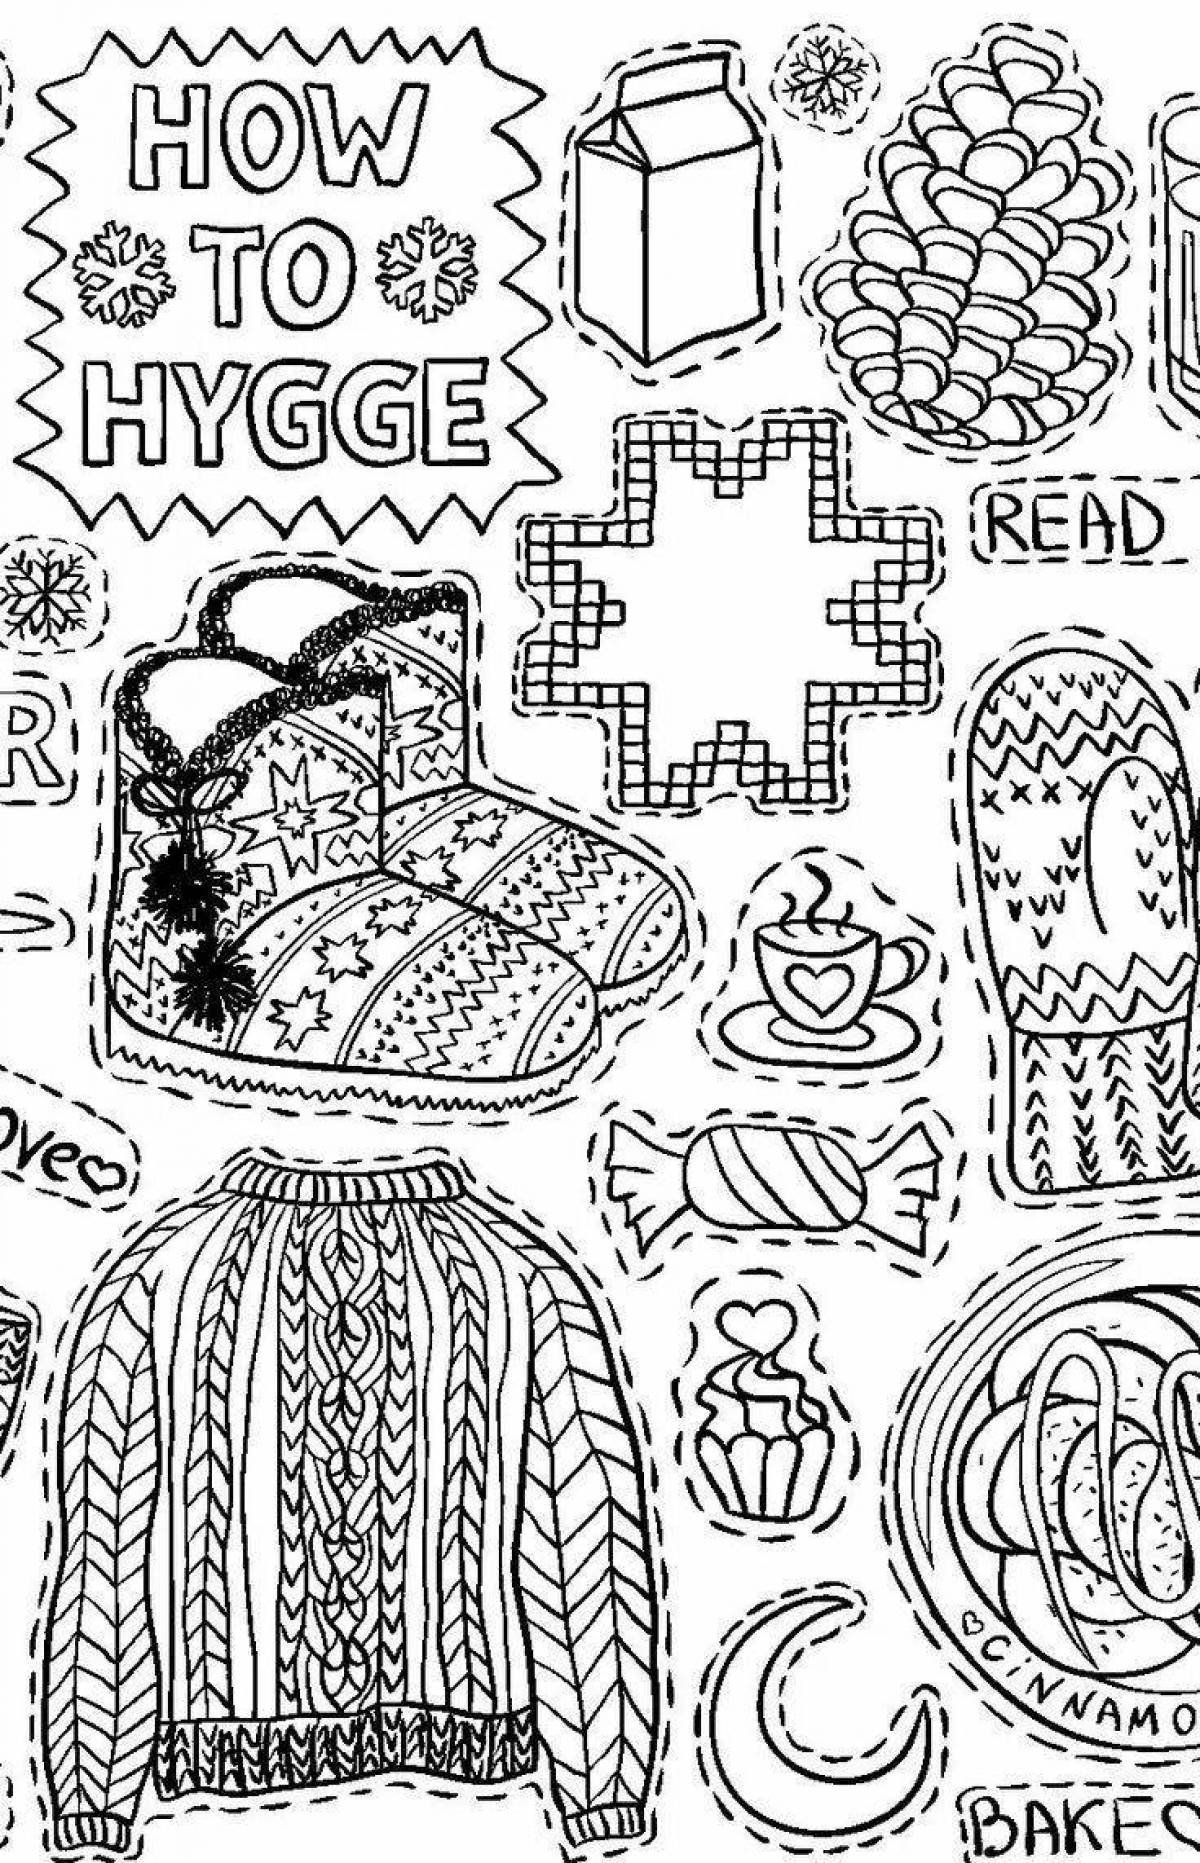 Silent hygge coloring book